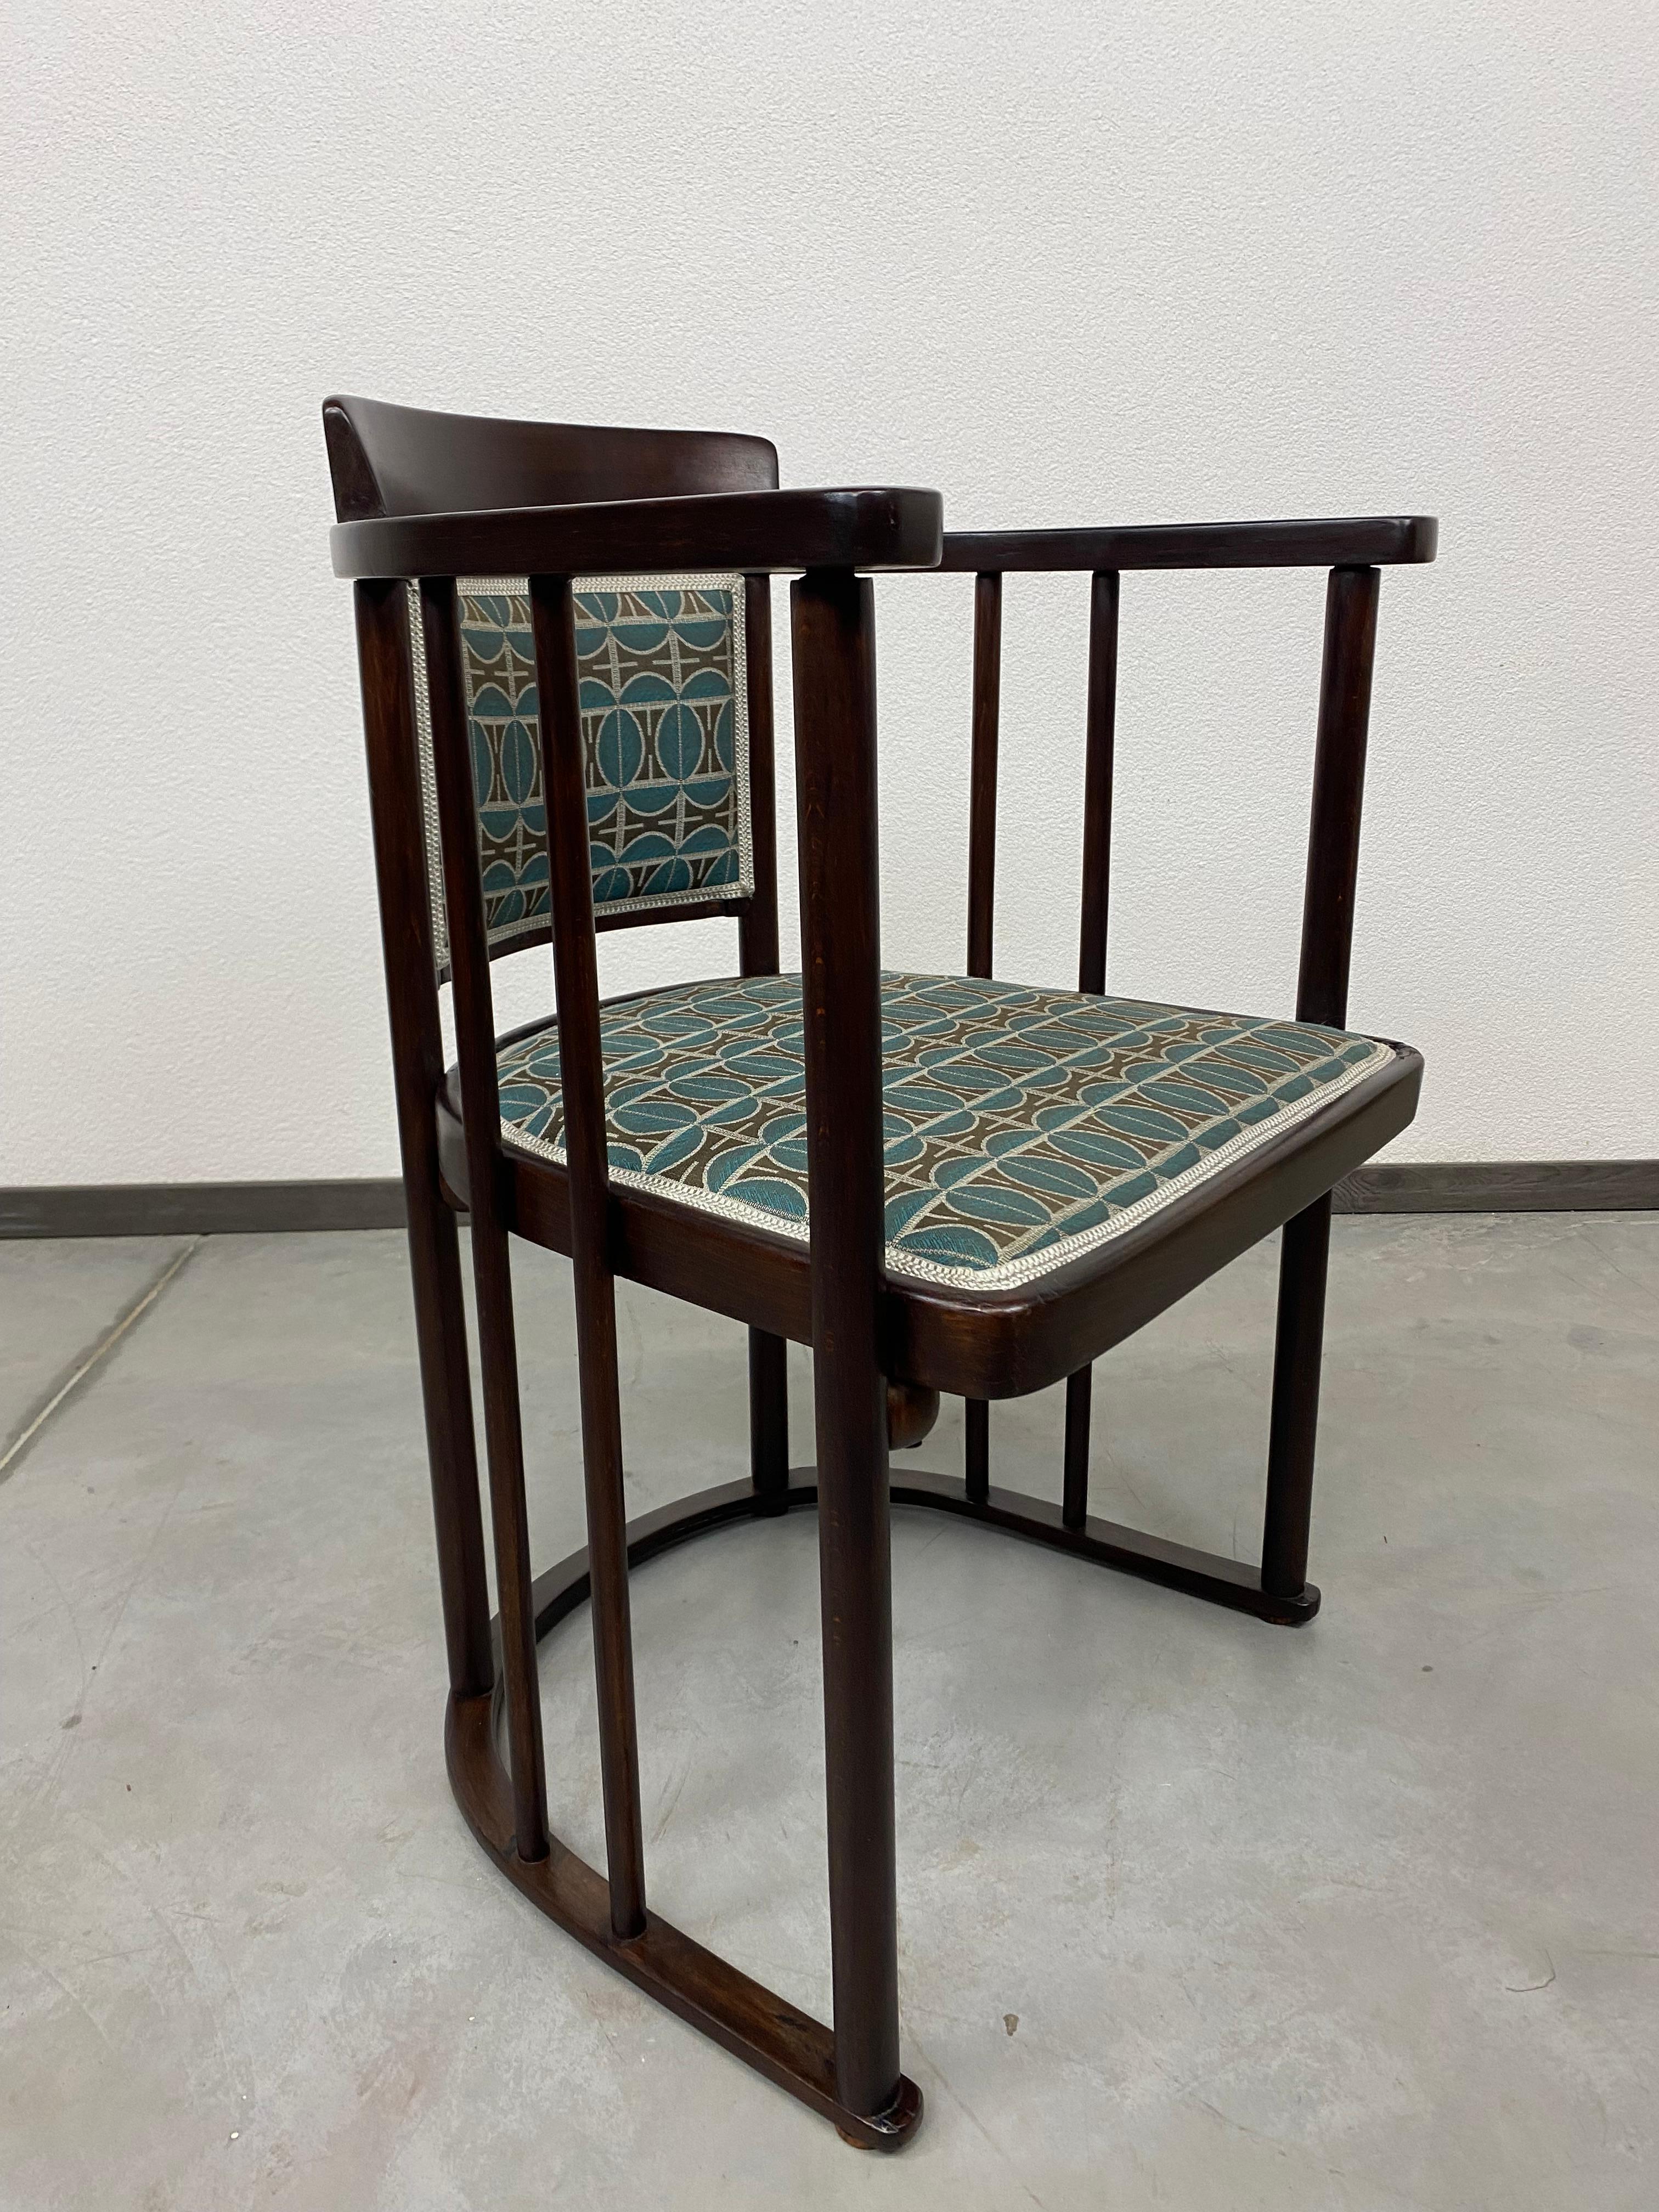 Secession office chair no.728 by Josef Hoffmann for Cabaret Fledermaus executed by J&J Kohn. Professionally stained and repolished with new fabric.